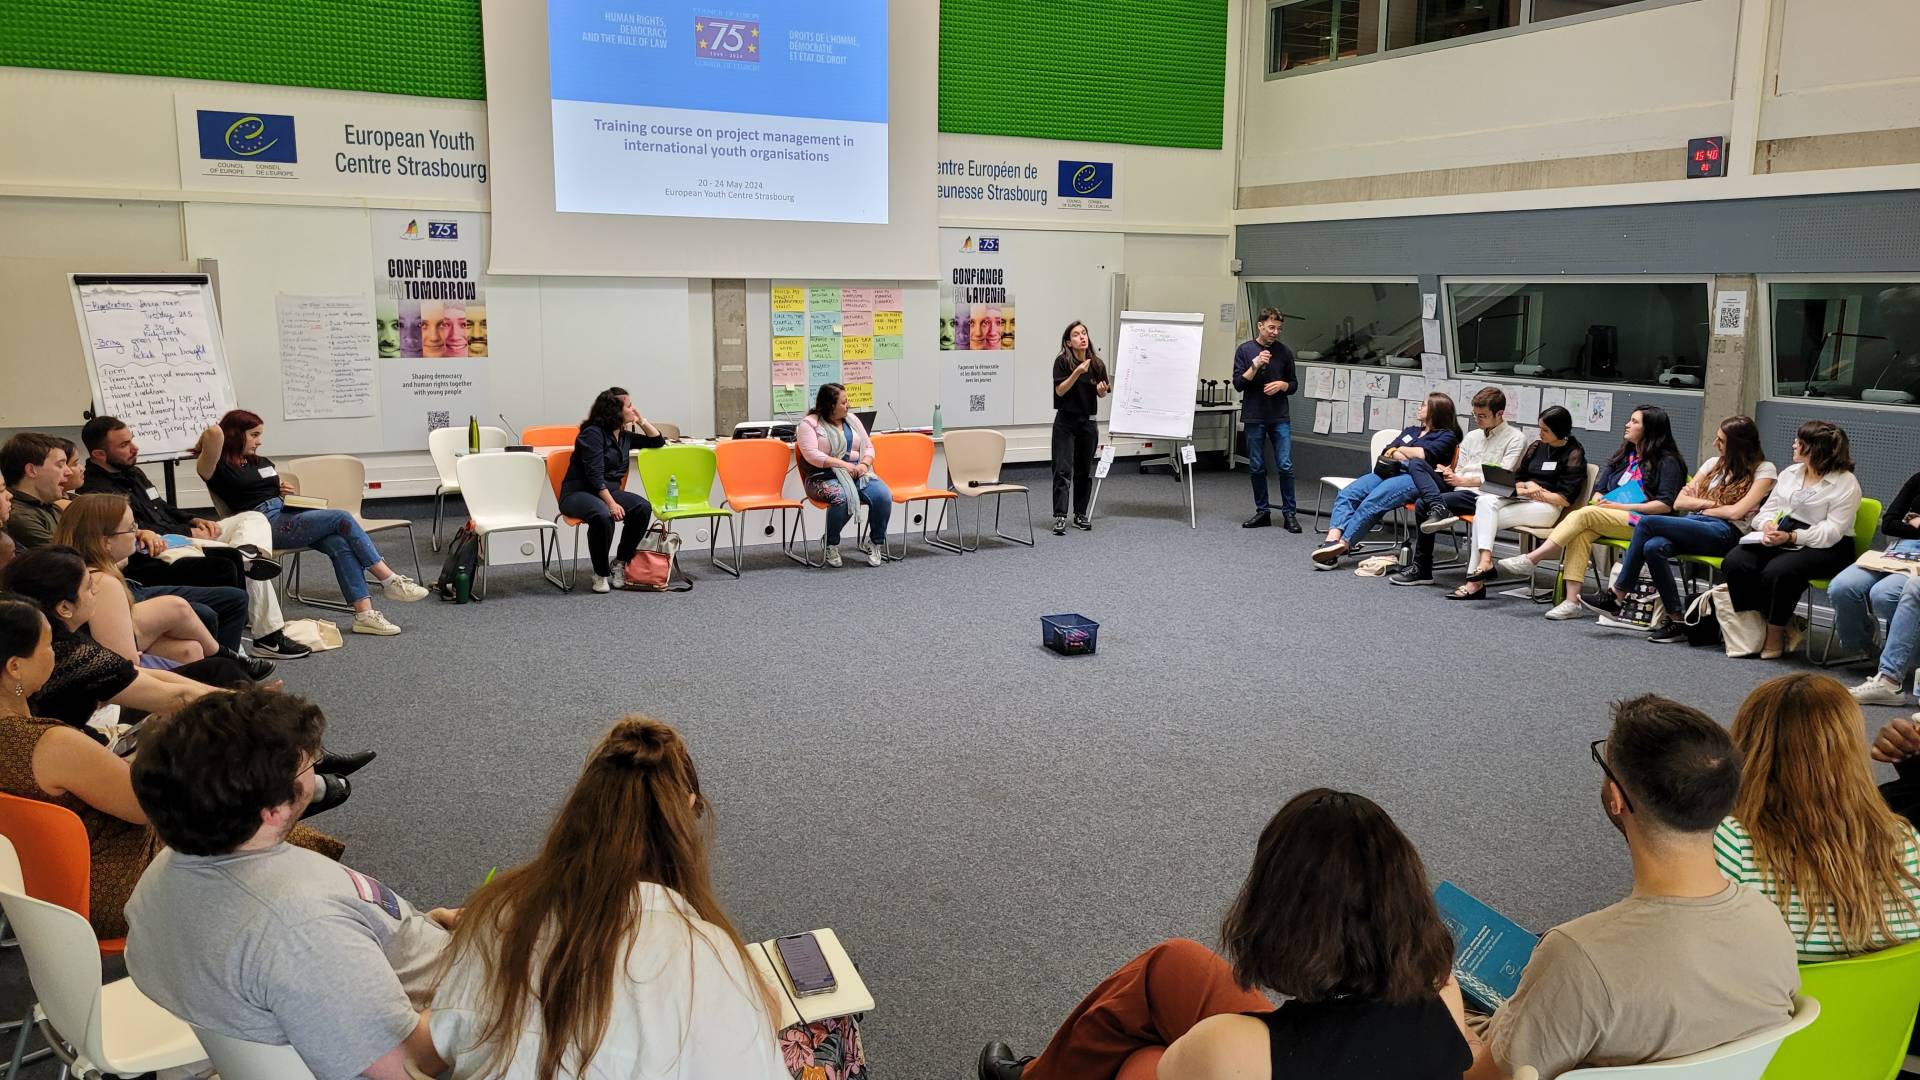 Building skills on project management in international youth organisations and networks